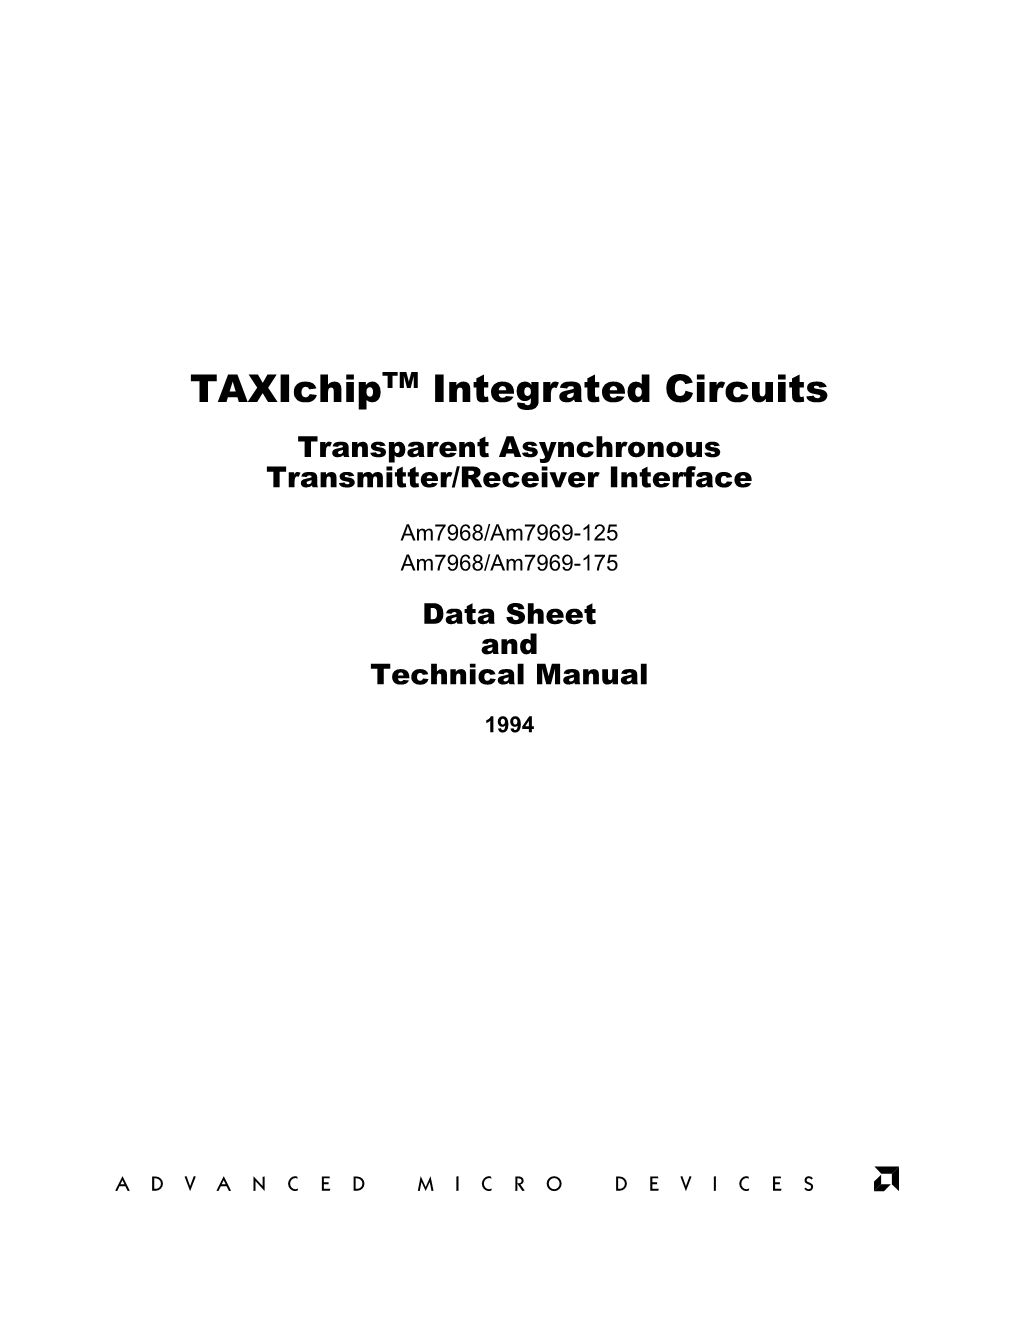 Taxichiptm Integrated Circuits Transparent Asynchronous Transmitter/Receiver Interface